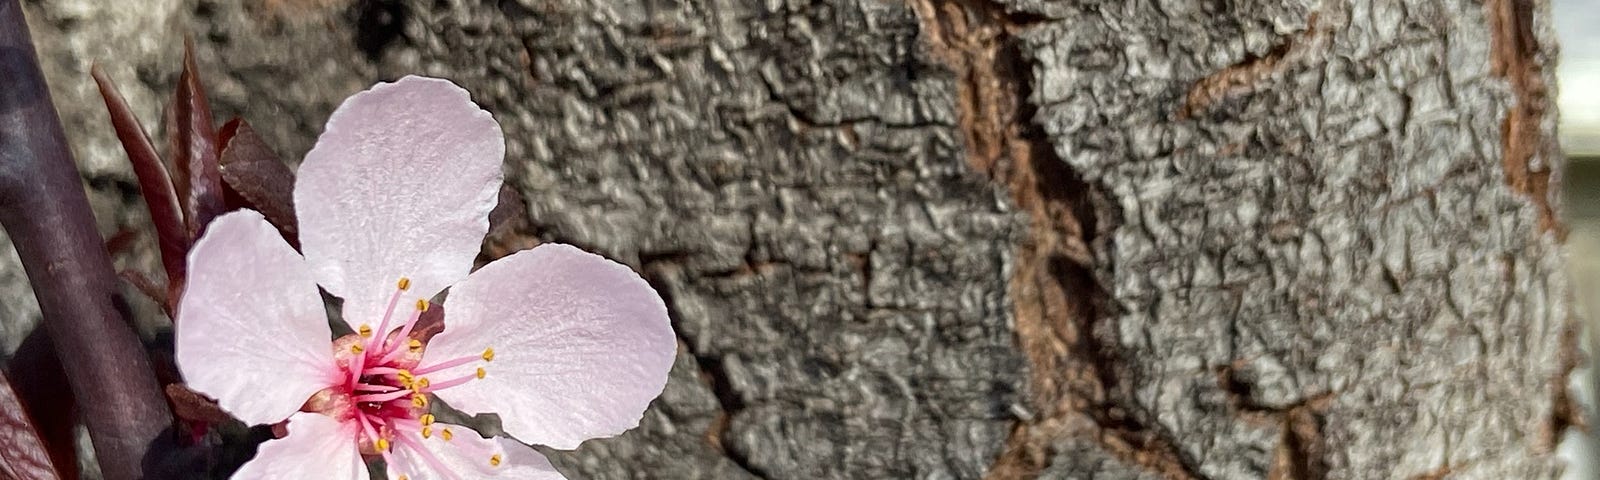 Pink flower against a brown tree bark background.